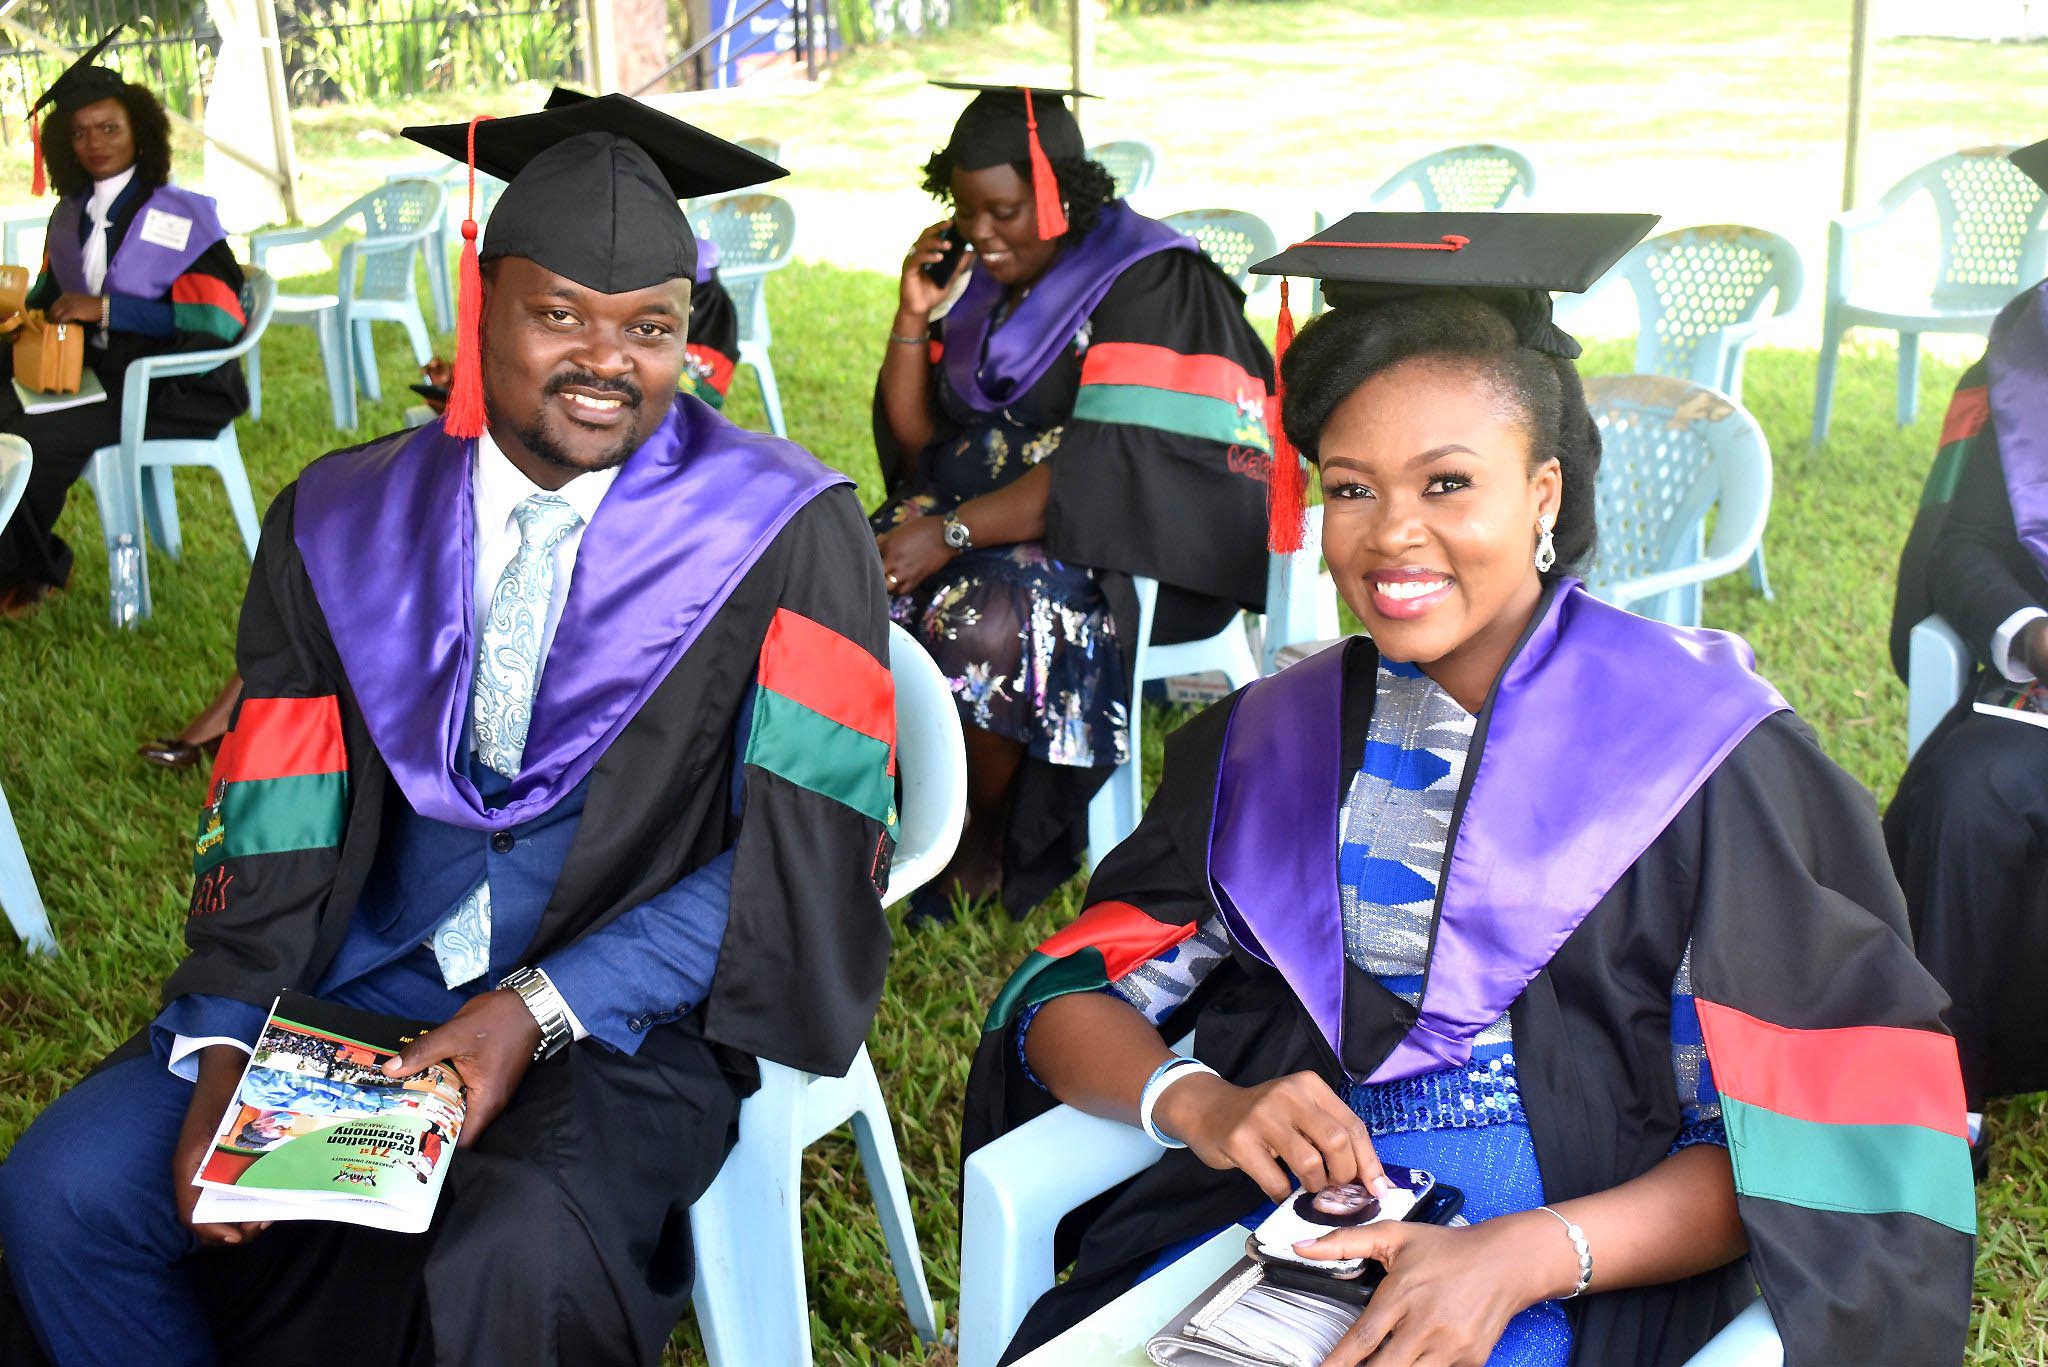 Soroti District Woman MP and Former Mak Guild President, Hon. Anna Ebaju Adeke (R) with fellow Master of Laws Graduands on Day 1 of the 71st Graduation Ceremony, 17th May 2021, Freedom Square, Makerere University.